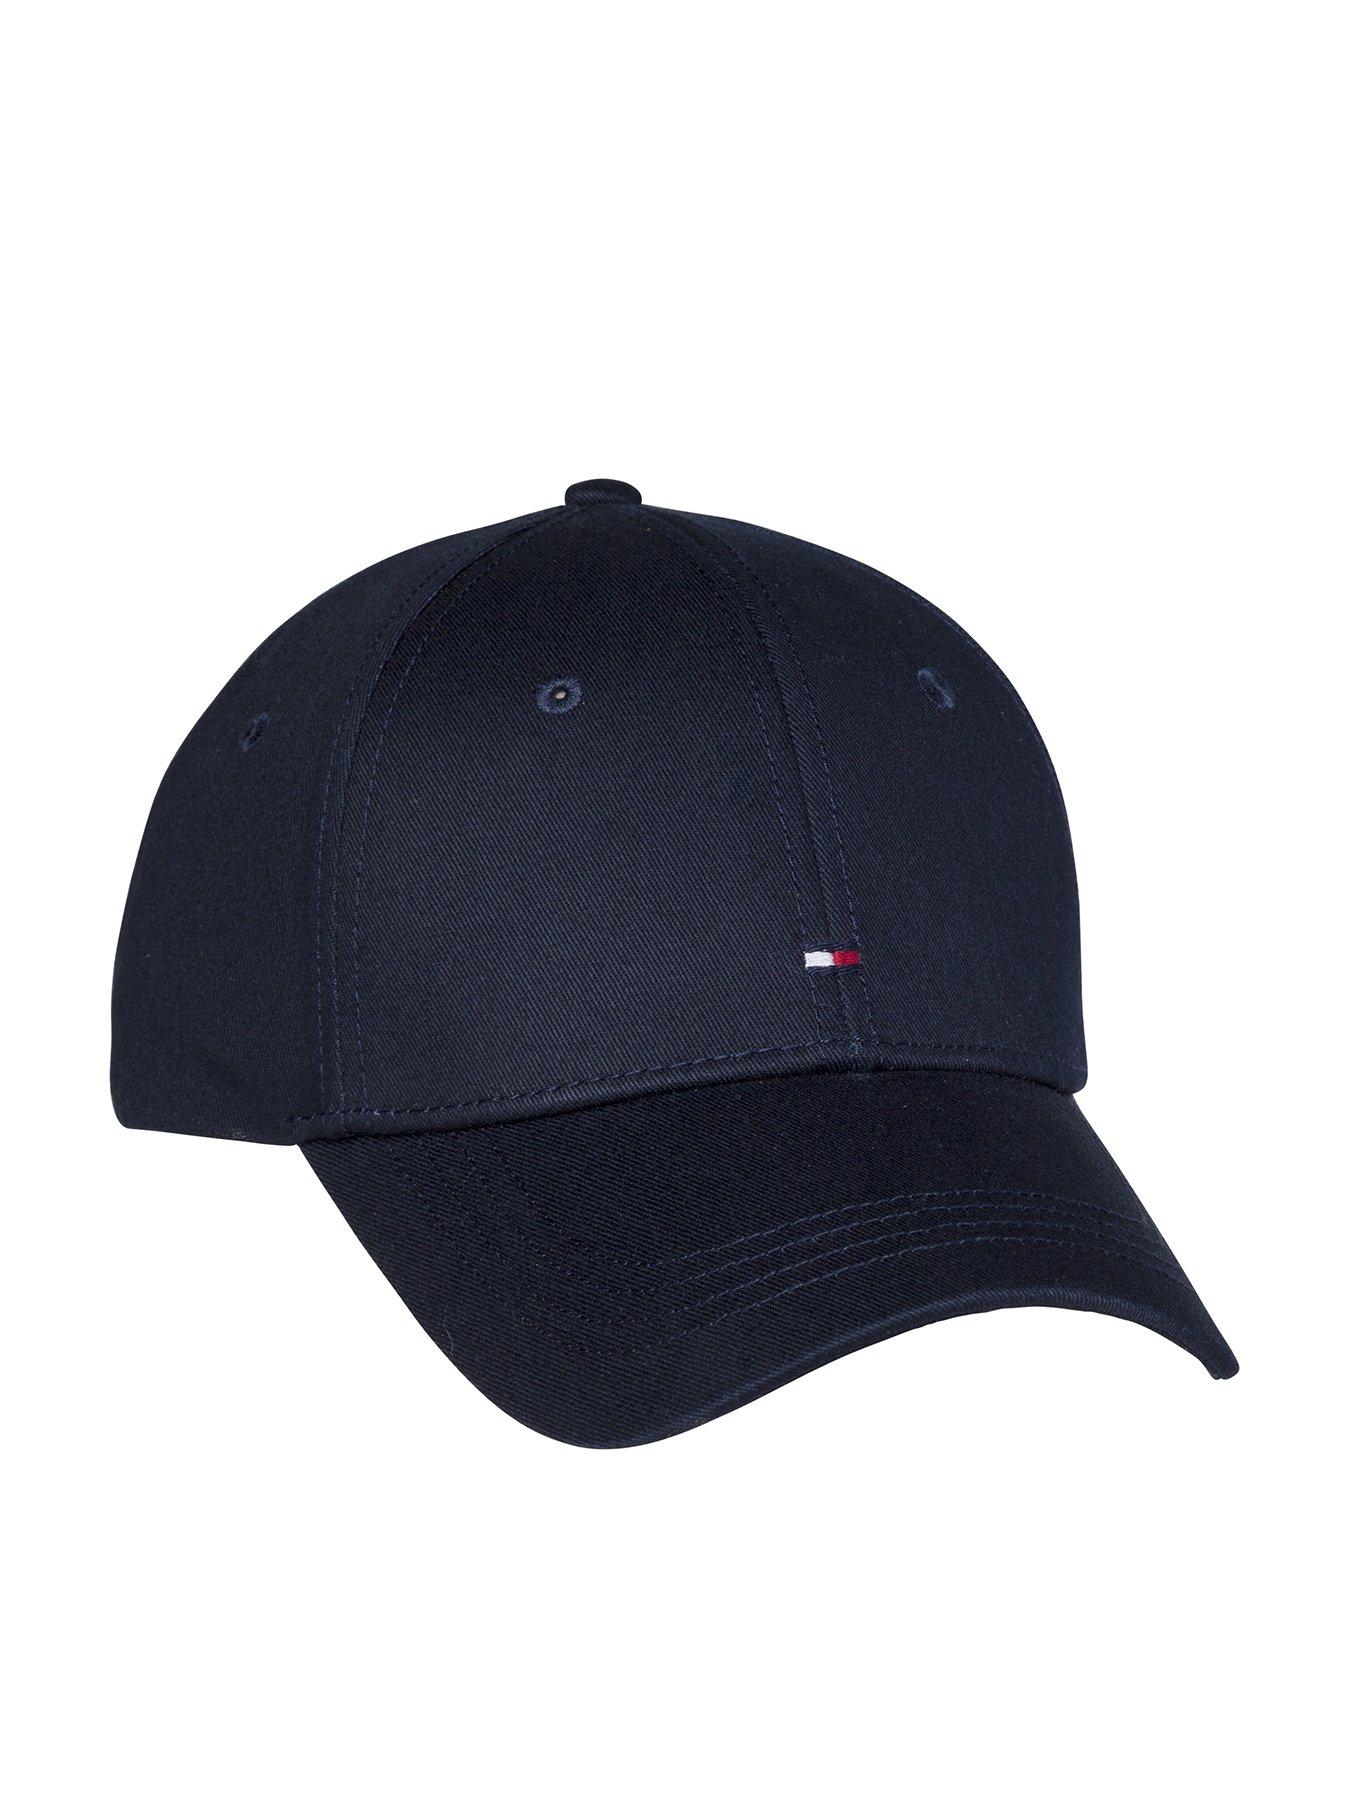 Fin Up Shield Cap | Fishing Caps & Hats | Anglers Only Navy